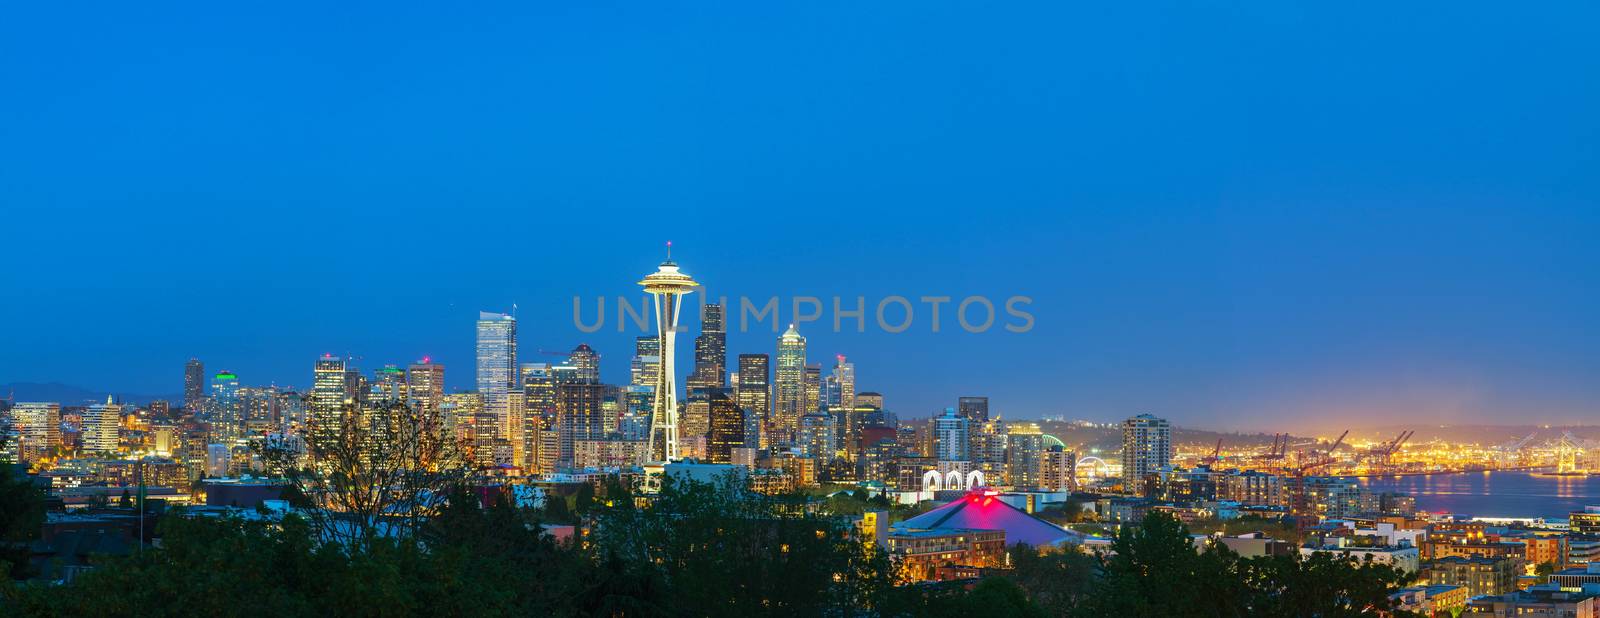 Downtown Seattle cityscape at night time as seen from the Kerry park